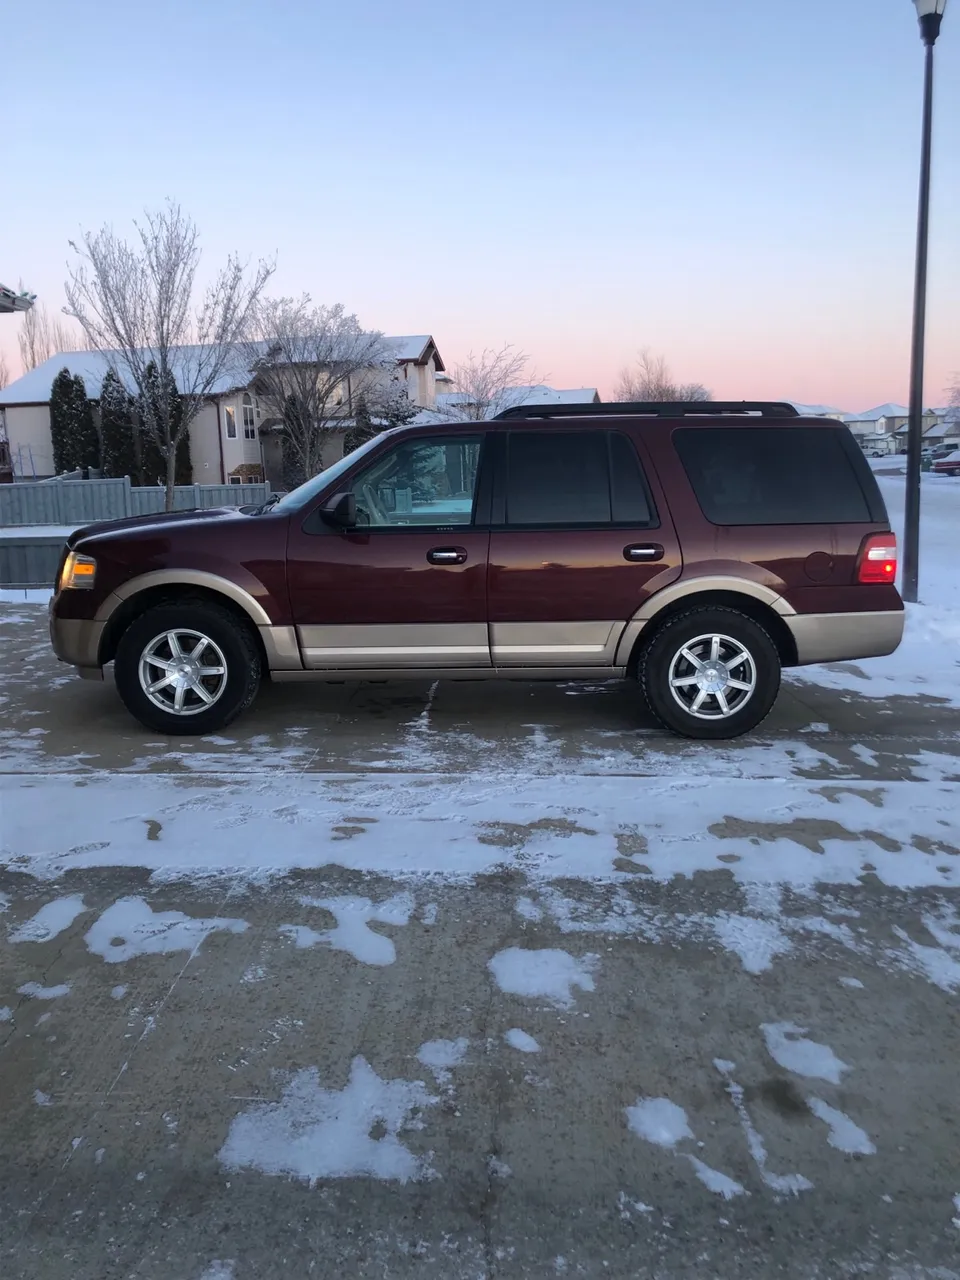 2011 Ford Expedition 4x4 $13,500 OBO